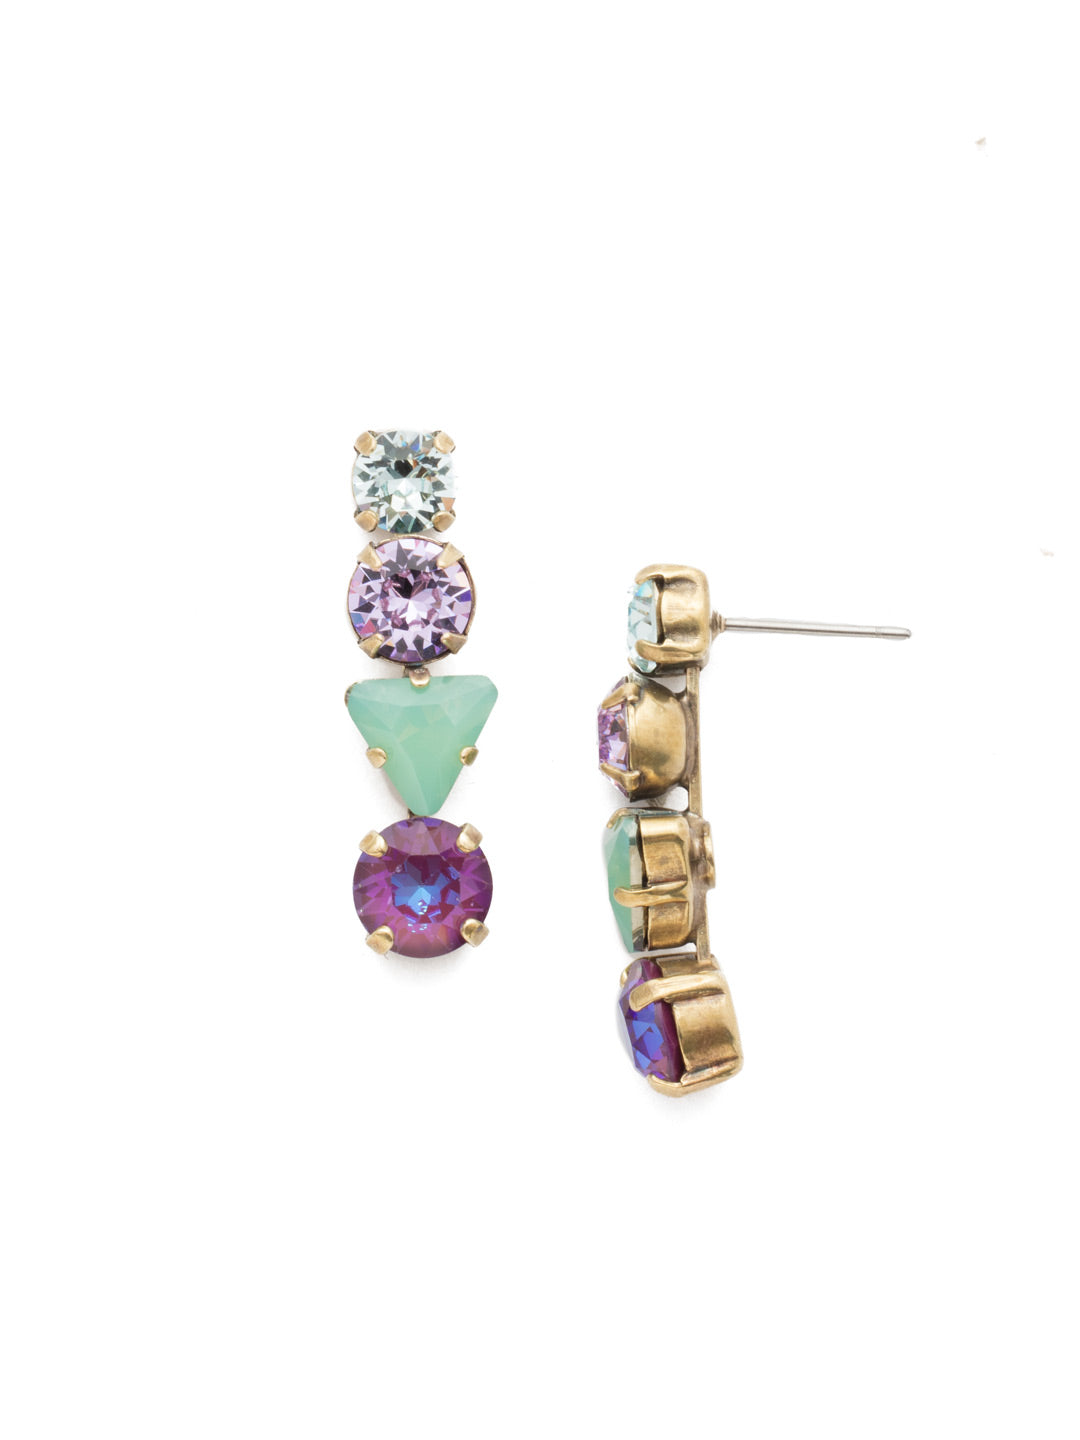 Brittany Dangle Earrings - EEN28AGIRB - The Brittany Dangle Earrings are seriously sparkling beauties. Bling on with drips of crystal stones in various shapes. You don't have to decide on just one. From Sorrelli's Iris Bloom collection in our Antique Gold-tone finish.